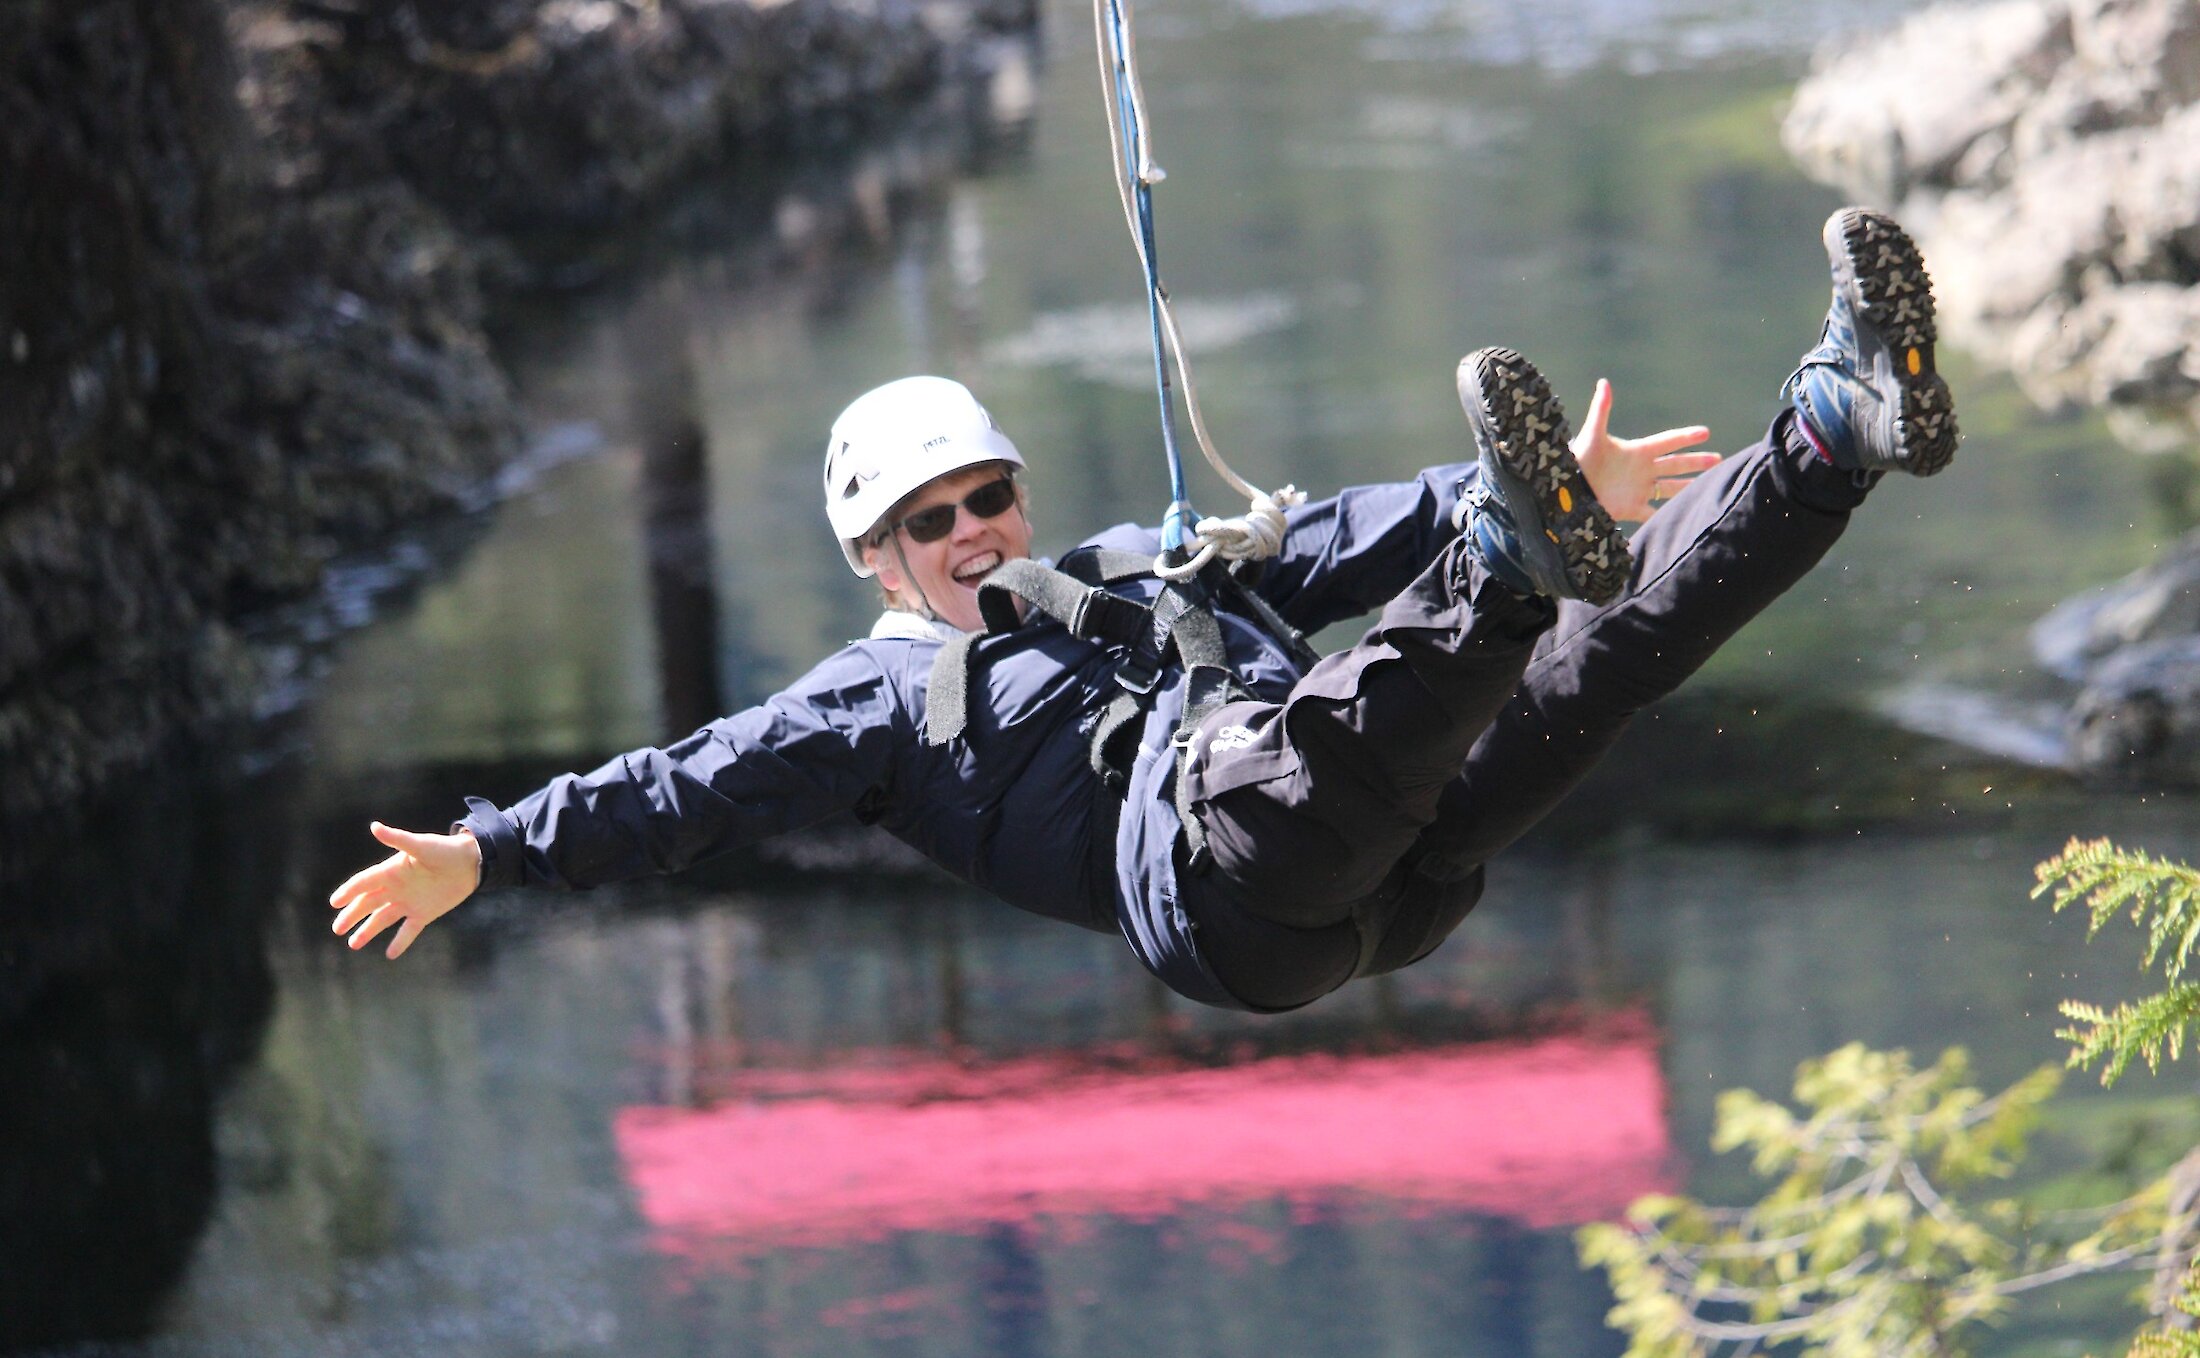 A smiling zipliner with arms held out zips over a river.